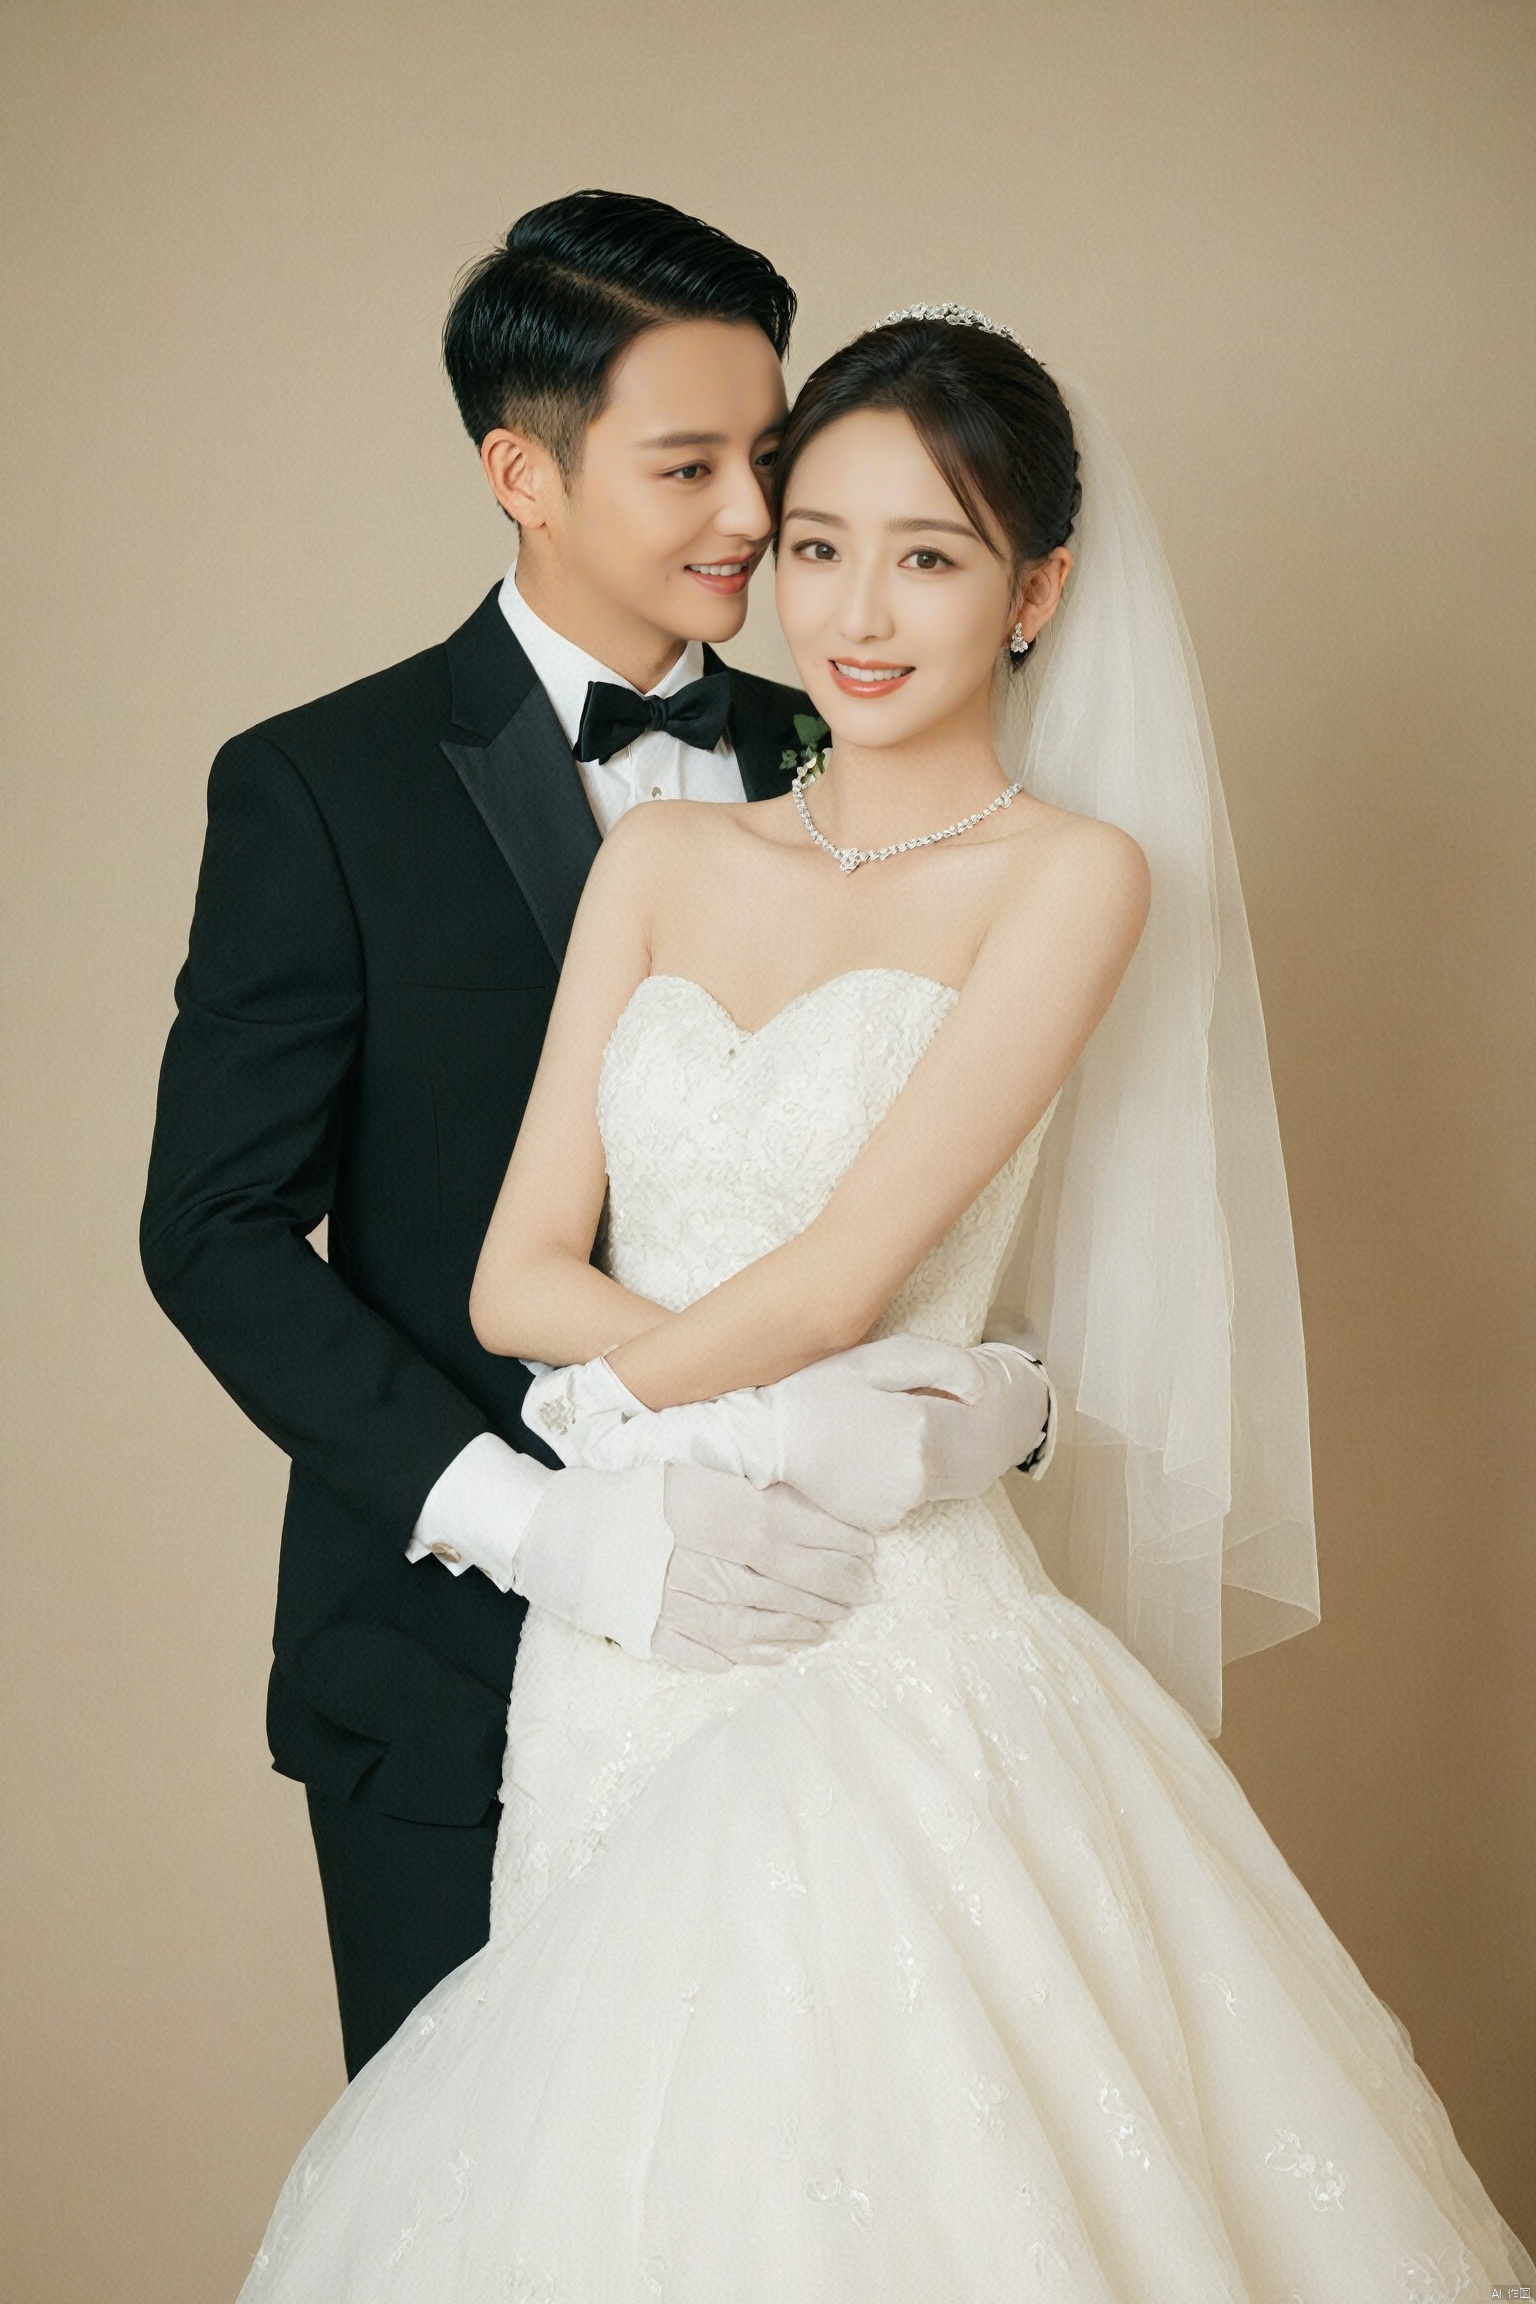  wedding attire,couple,bride,groom,wedding gown,tuxedo,bridal veil,gloves,bouquet,happy expression,posing,studio portrait,elegance,formal wear,Asian ethnicity,side glance,romantic,standing pose,timeless,sophisticated,muted colors,soft lighting,textured background,, masterpiece,best quality,ultra-detailed, , yaya